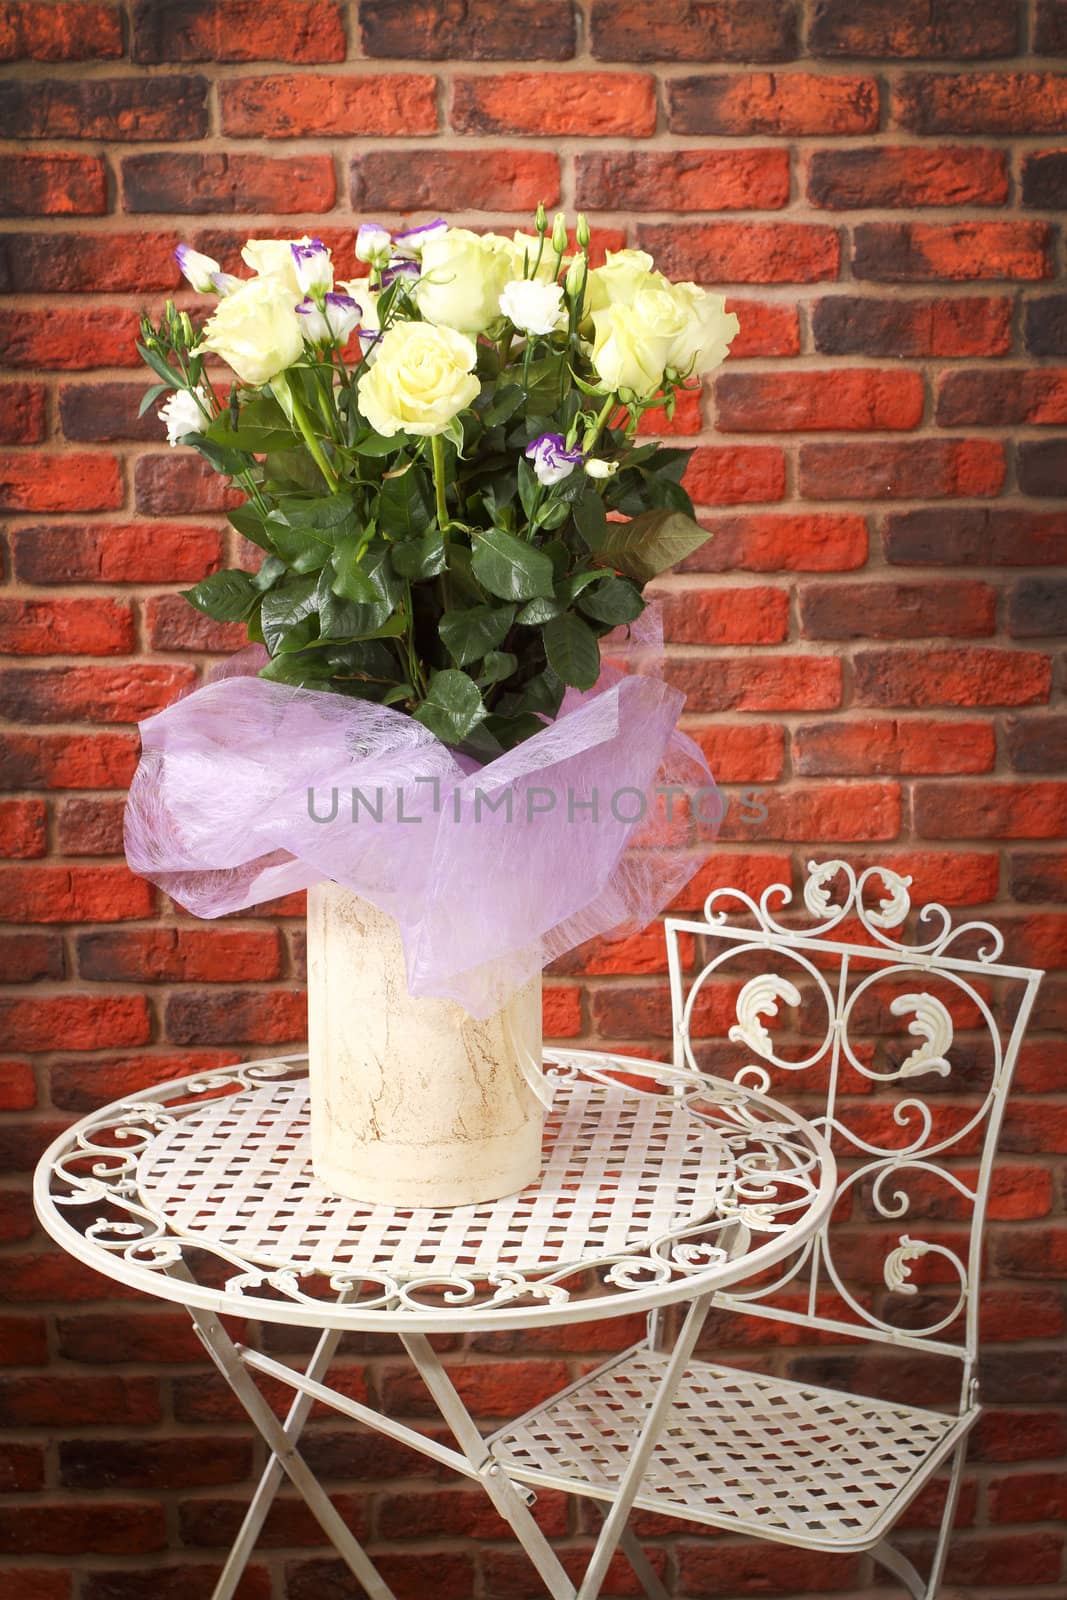 Bunch of flowers on a metal shod table against a wall from a red brick